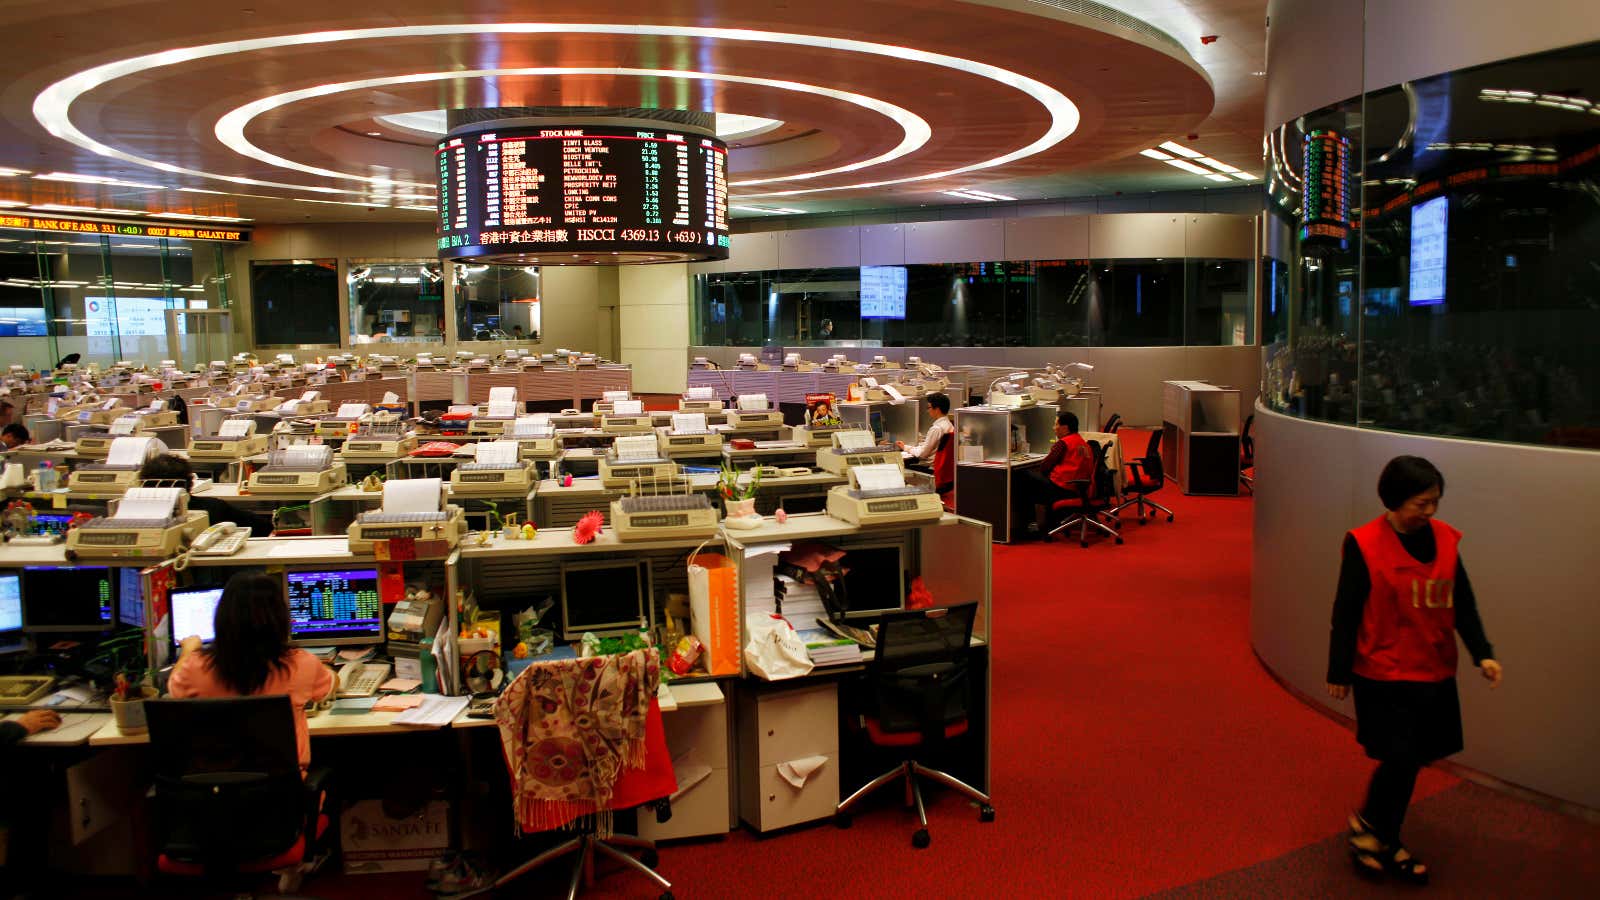 Was the Hong Kong stock exchange scene of a crime?